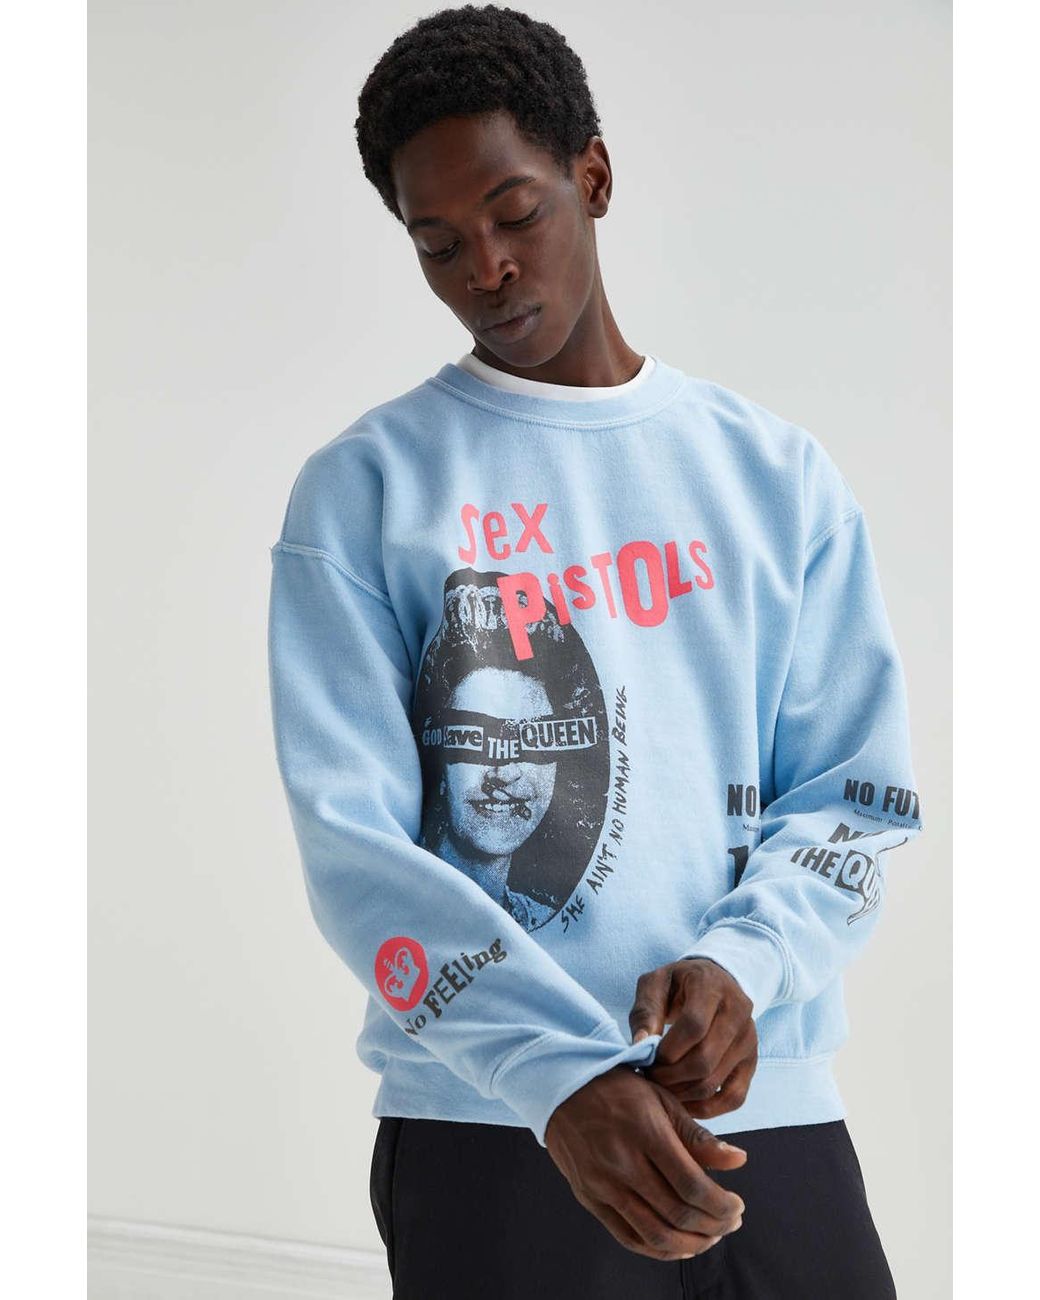 Urban Outfitters Cotton Sex Pistols Save The Queen Crew Neck Sweatshirt 